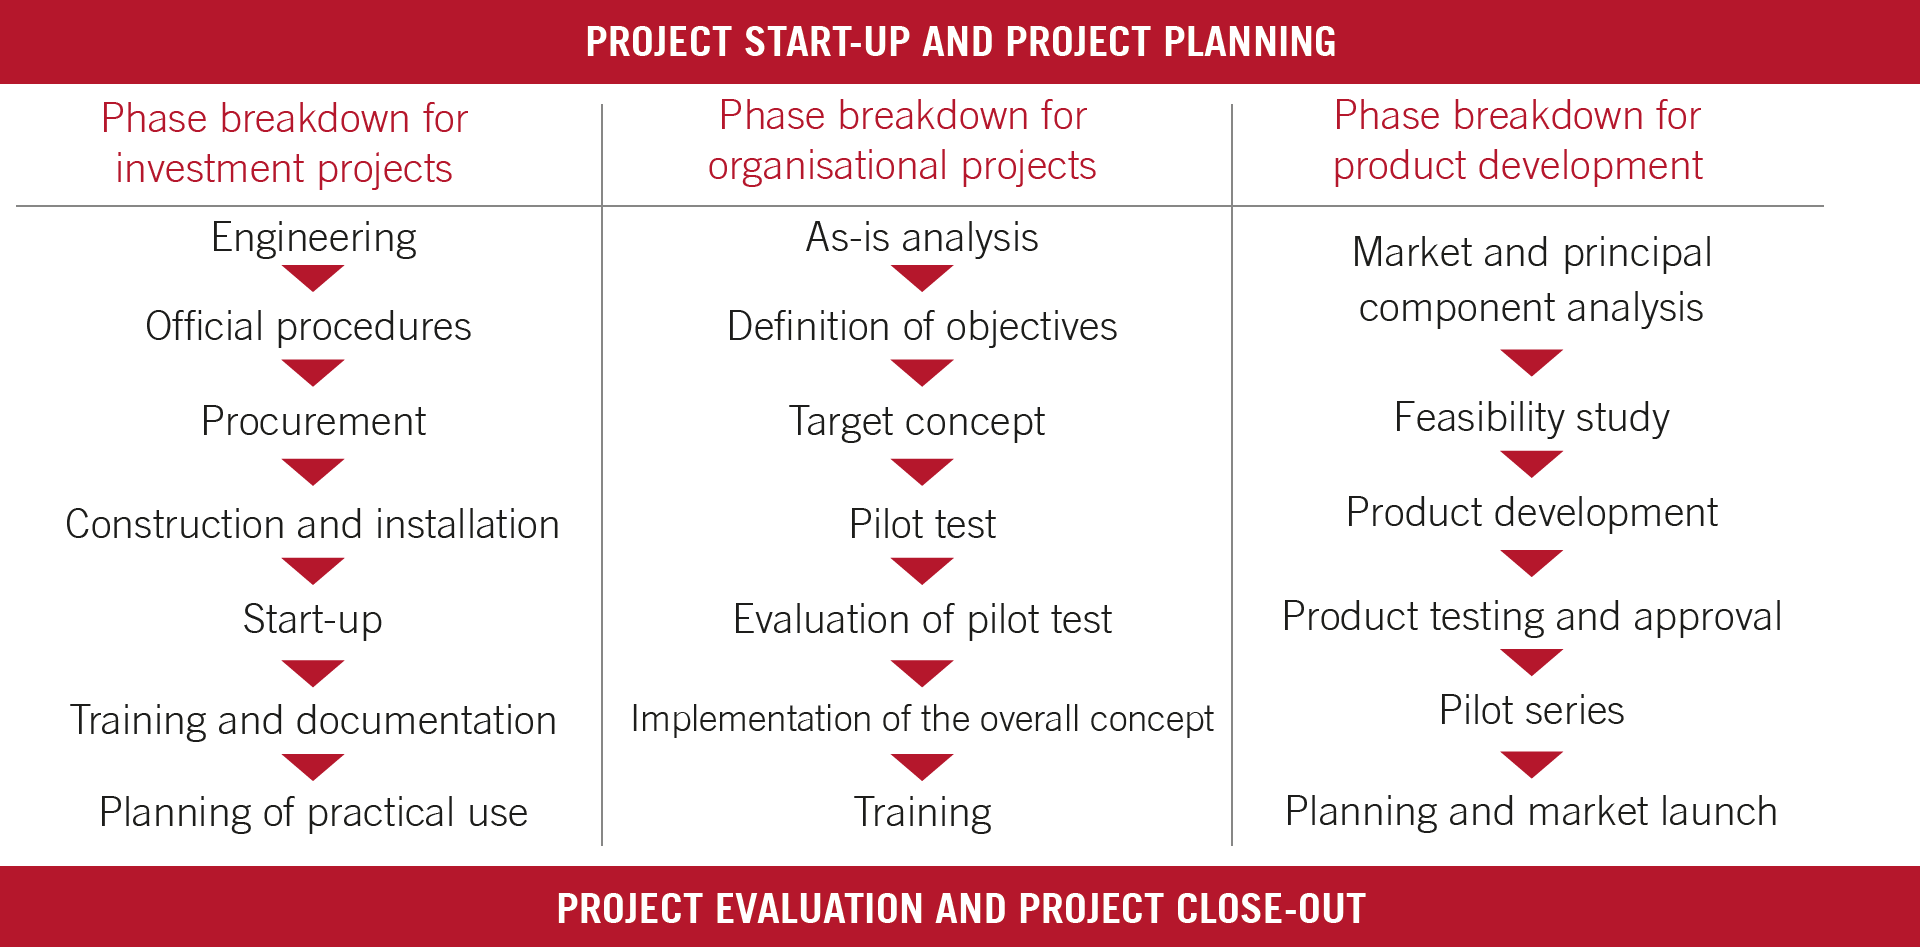 Standard phase models for different project types